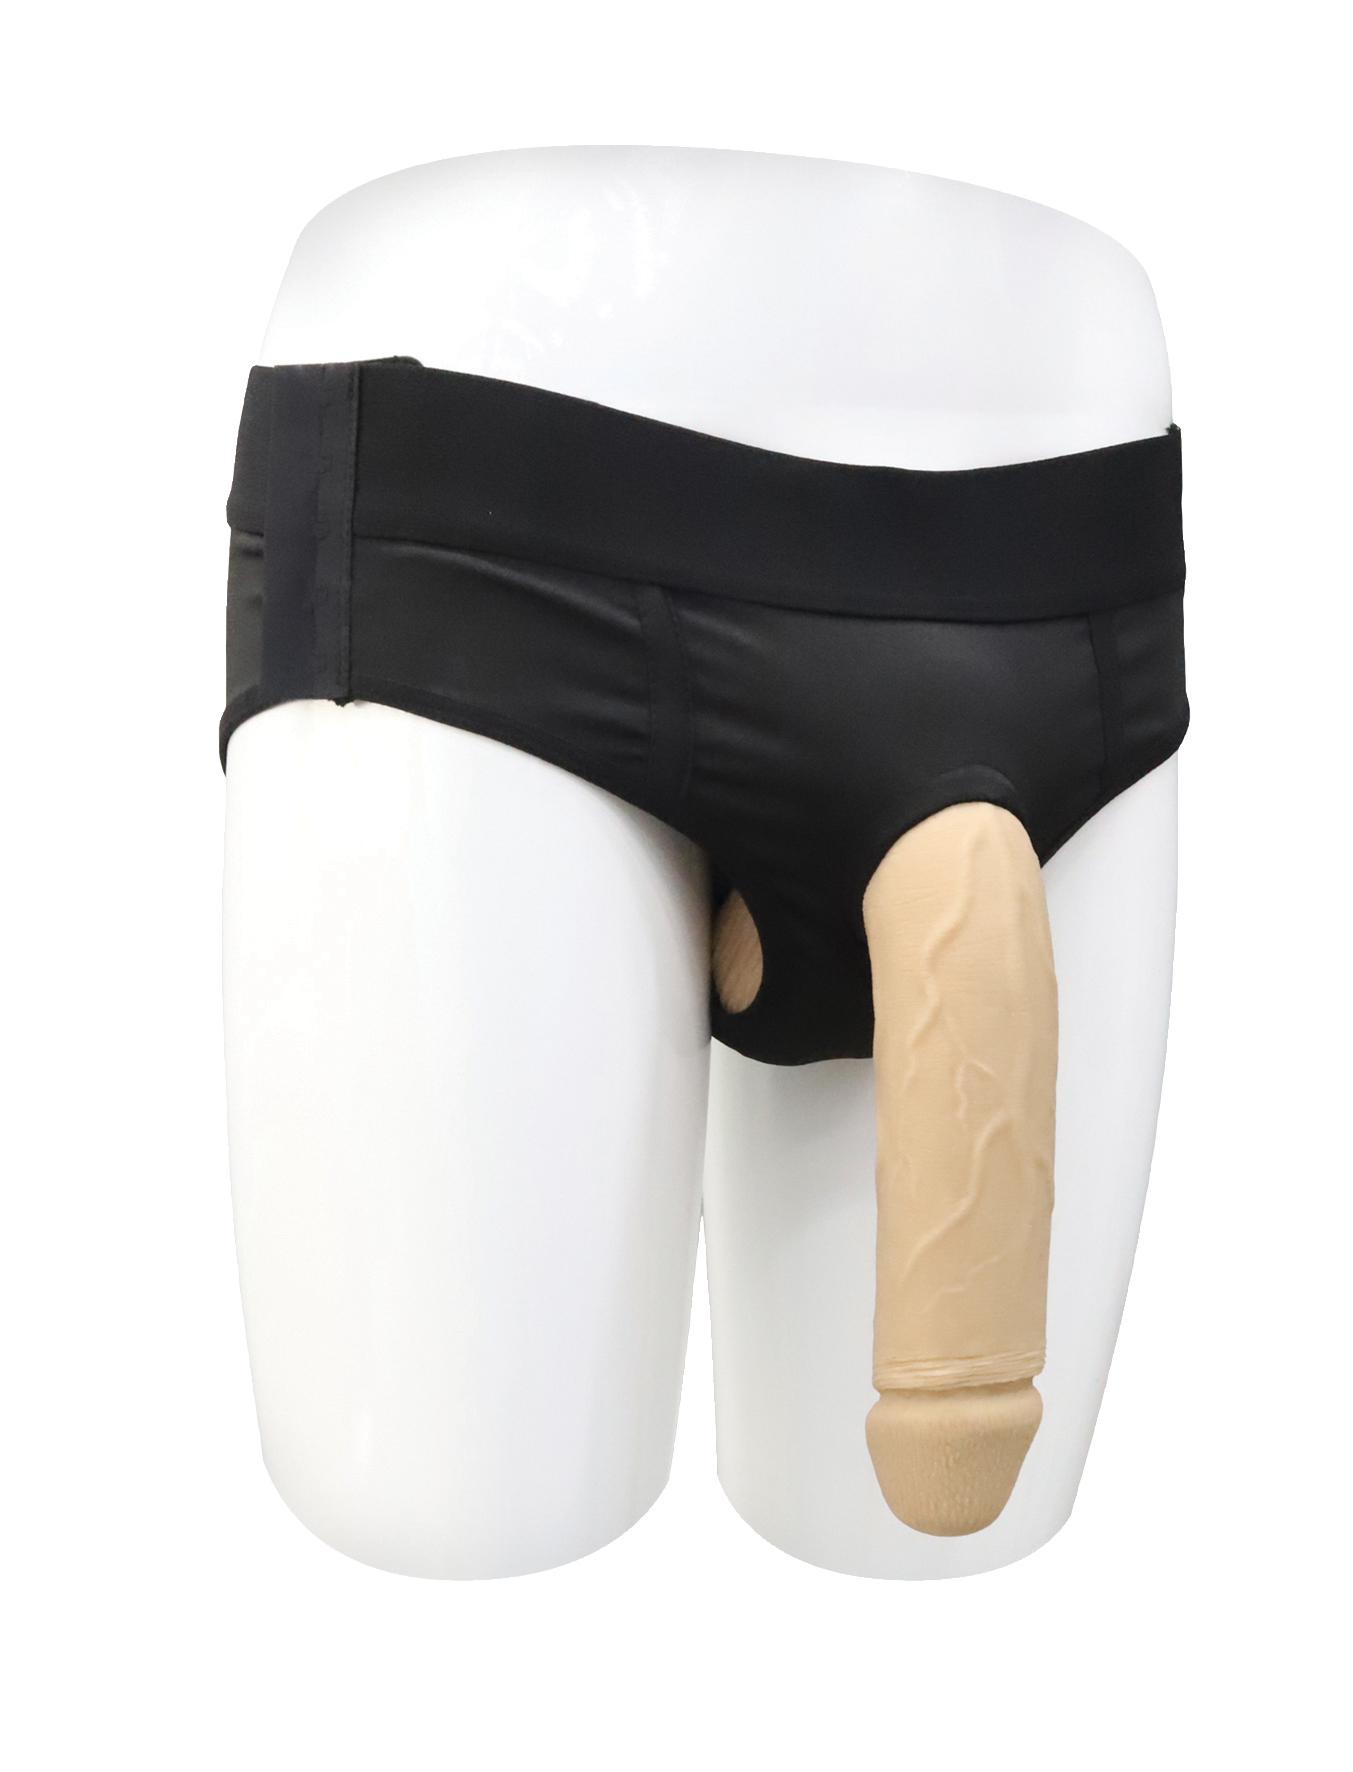 XX-DREAMSTOYS FTM Packer with panty Size XL